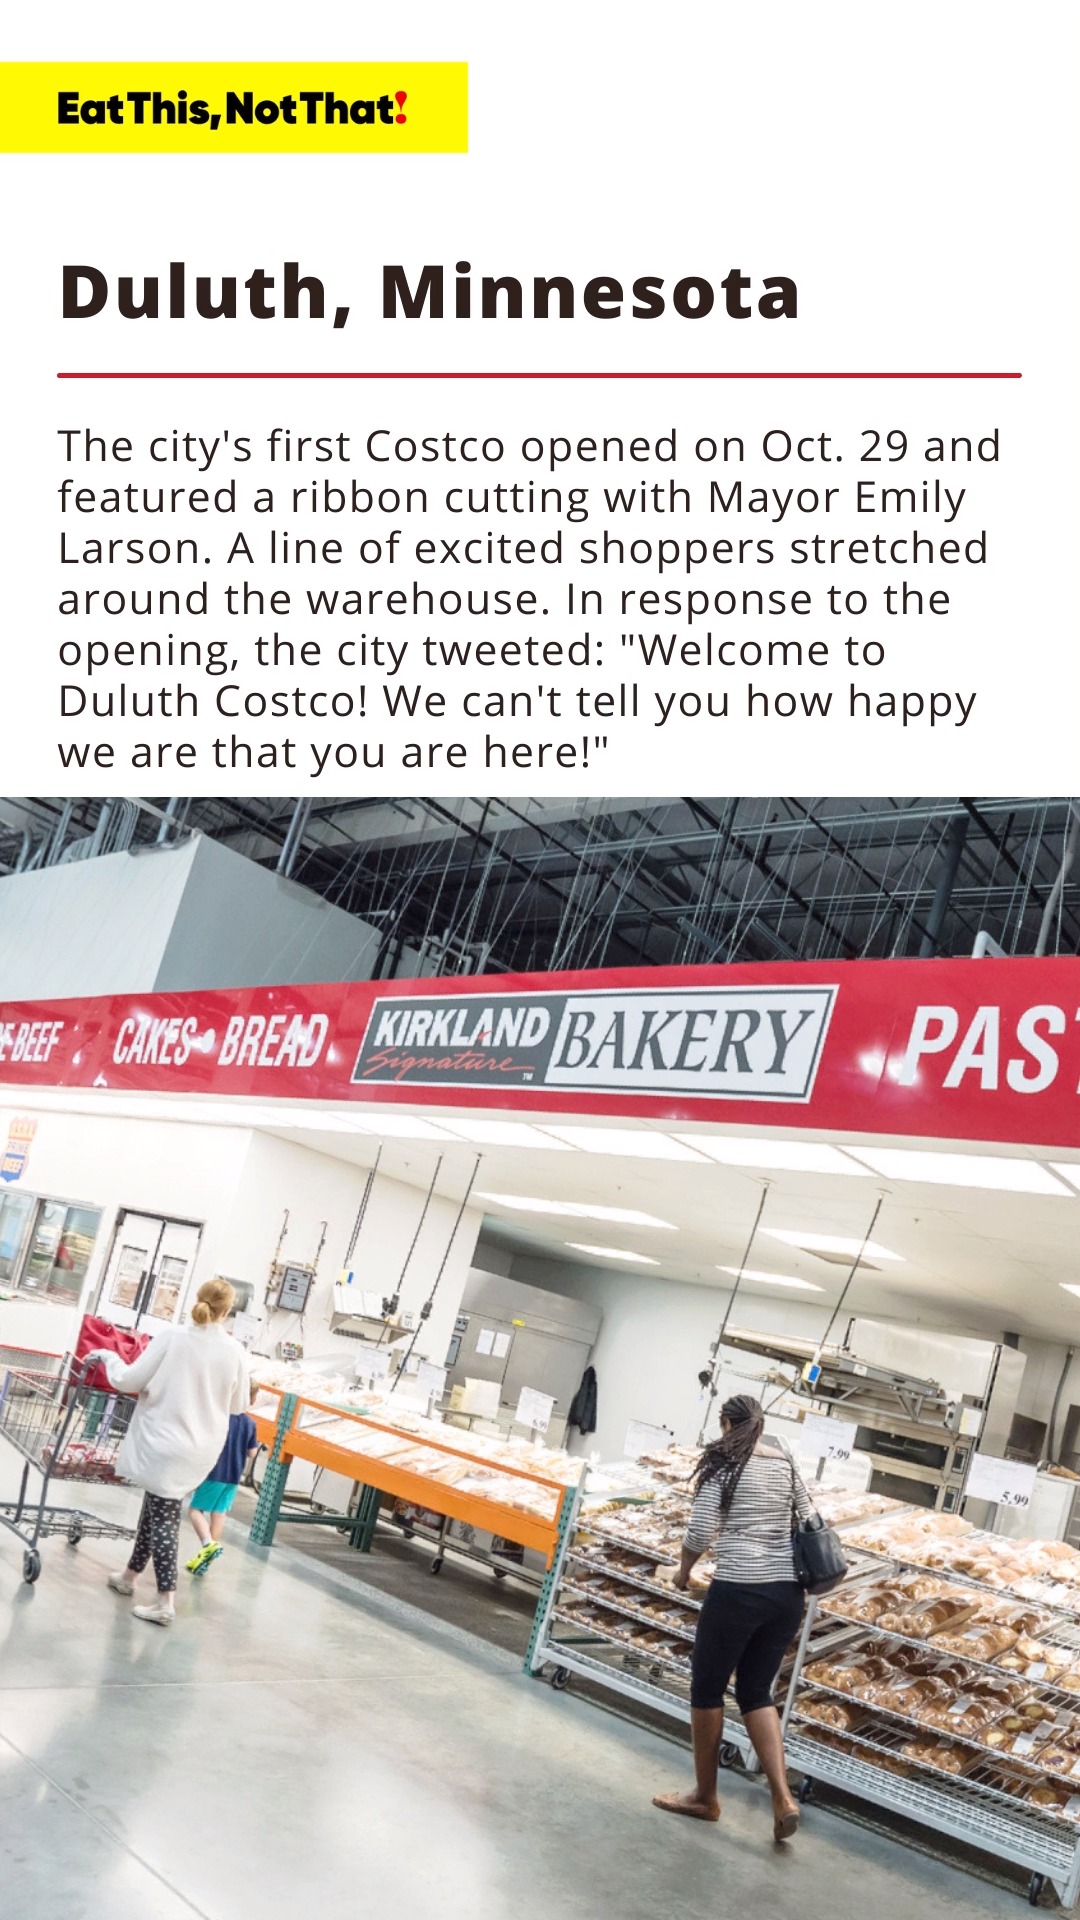 Cutco Cutlery Opening Edina Store Early Next Month